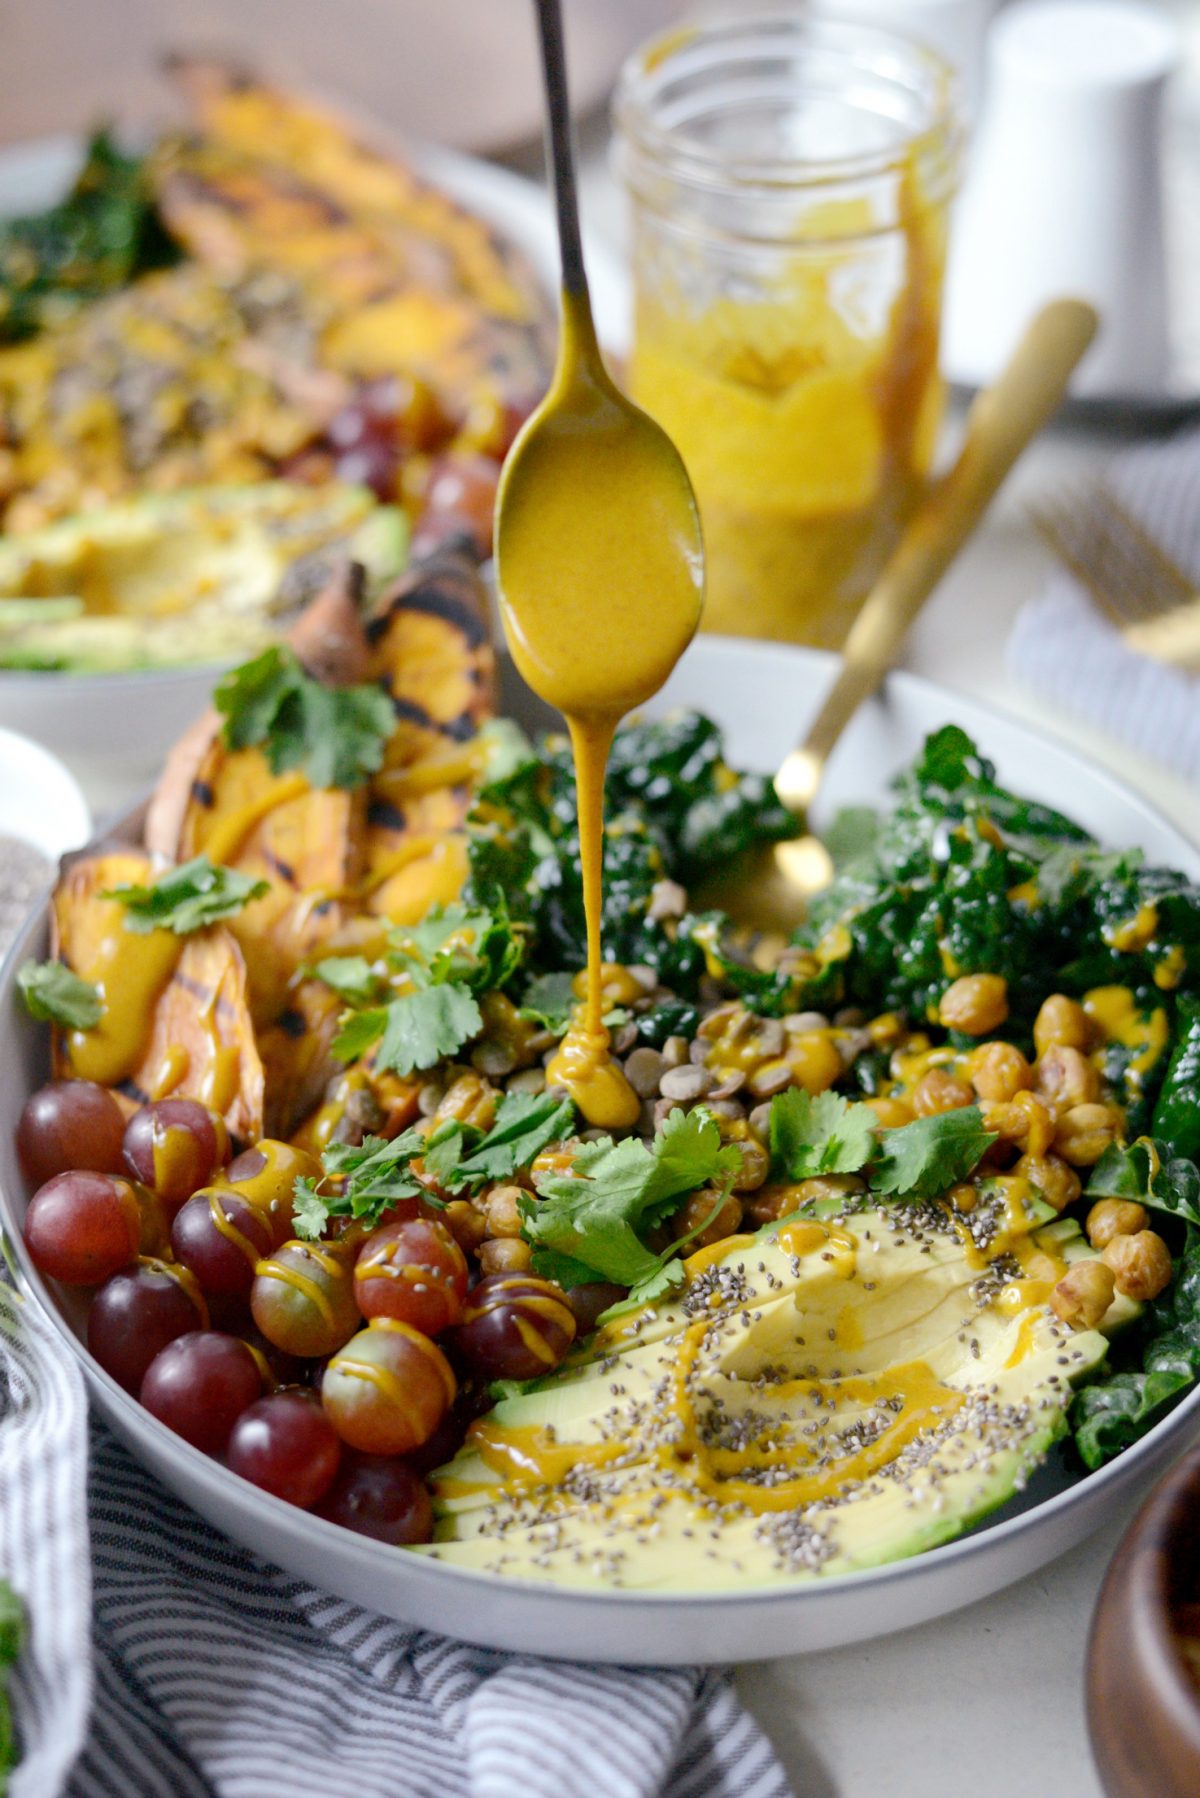 Grilled Sweet Potato, Lentil and Kale Buddha Bowl with Golden Almond Butter Dressing l SimplyScratch.com (21)